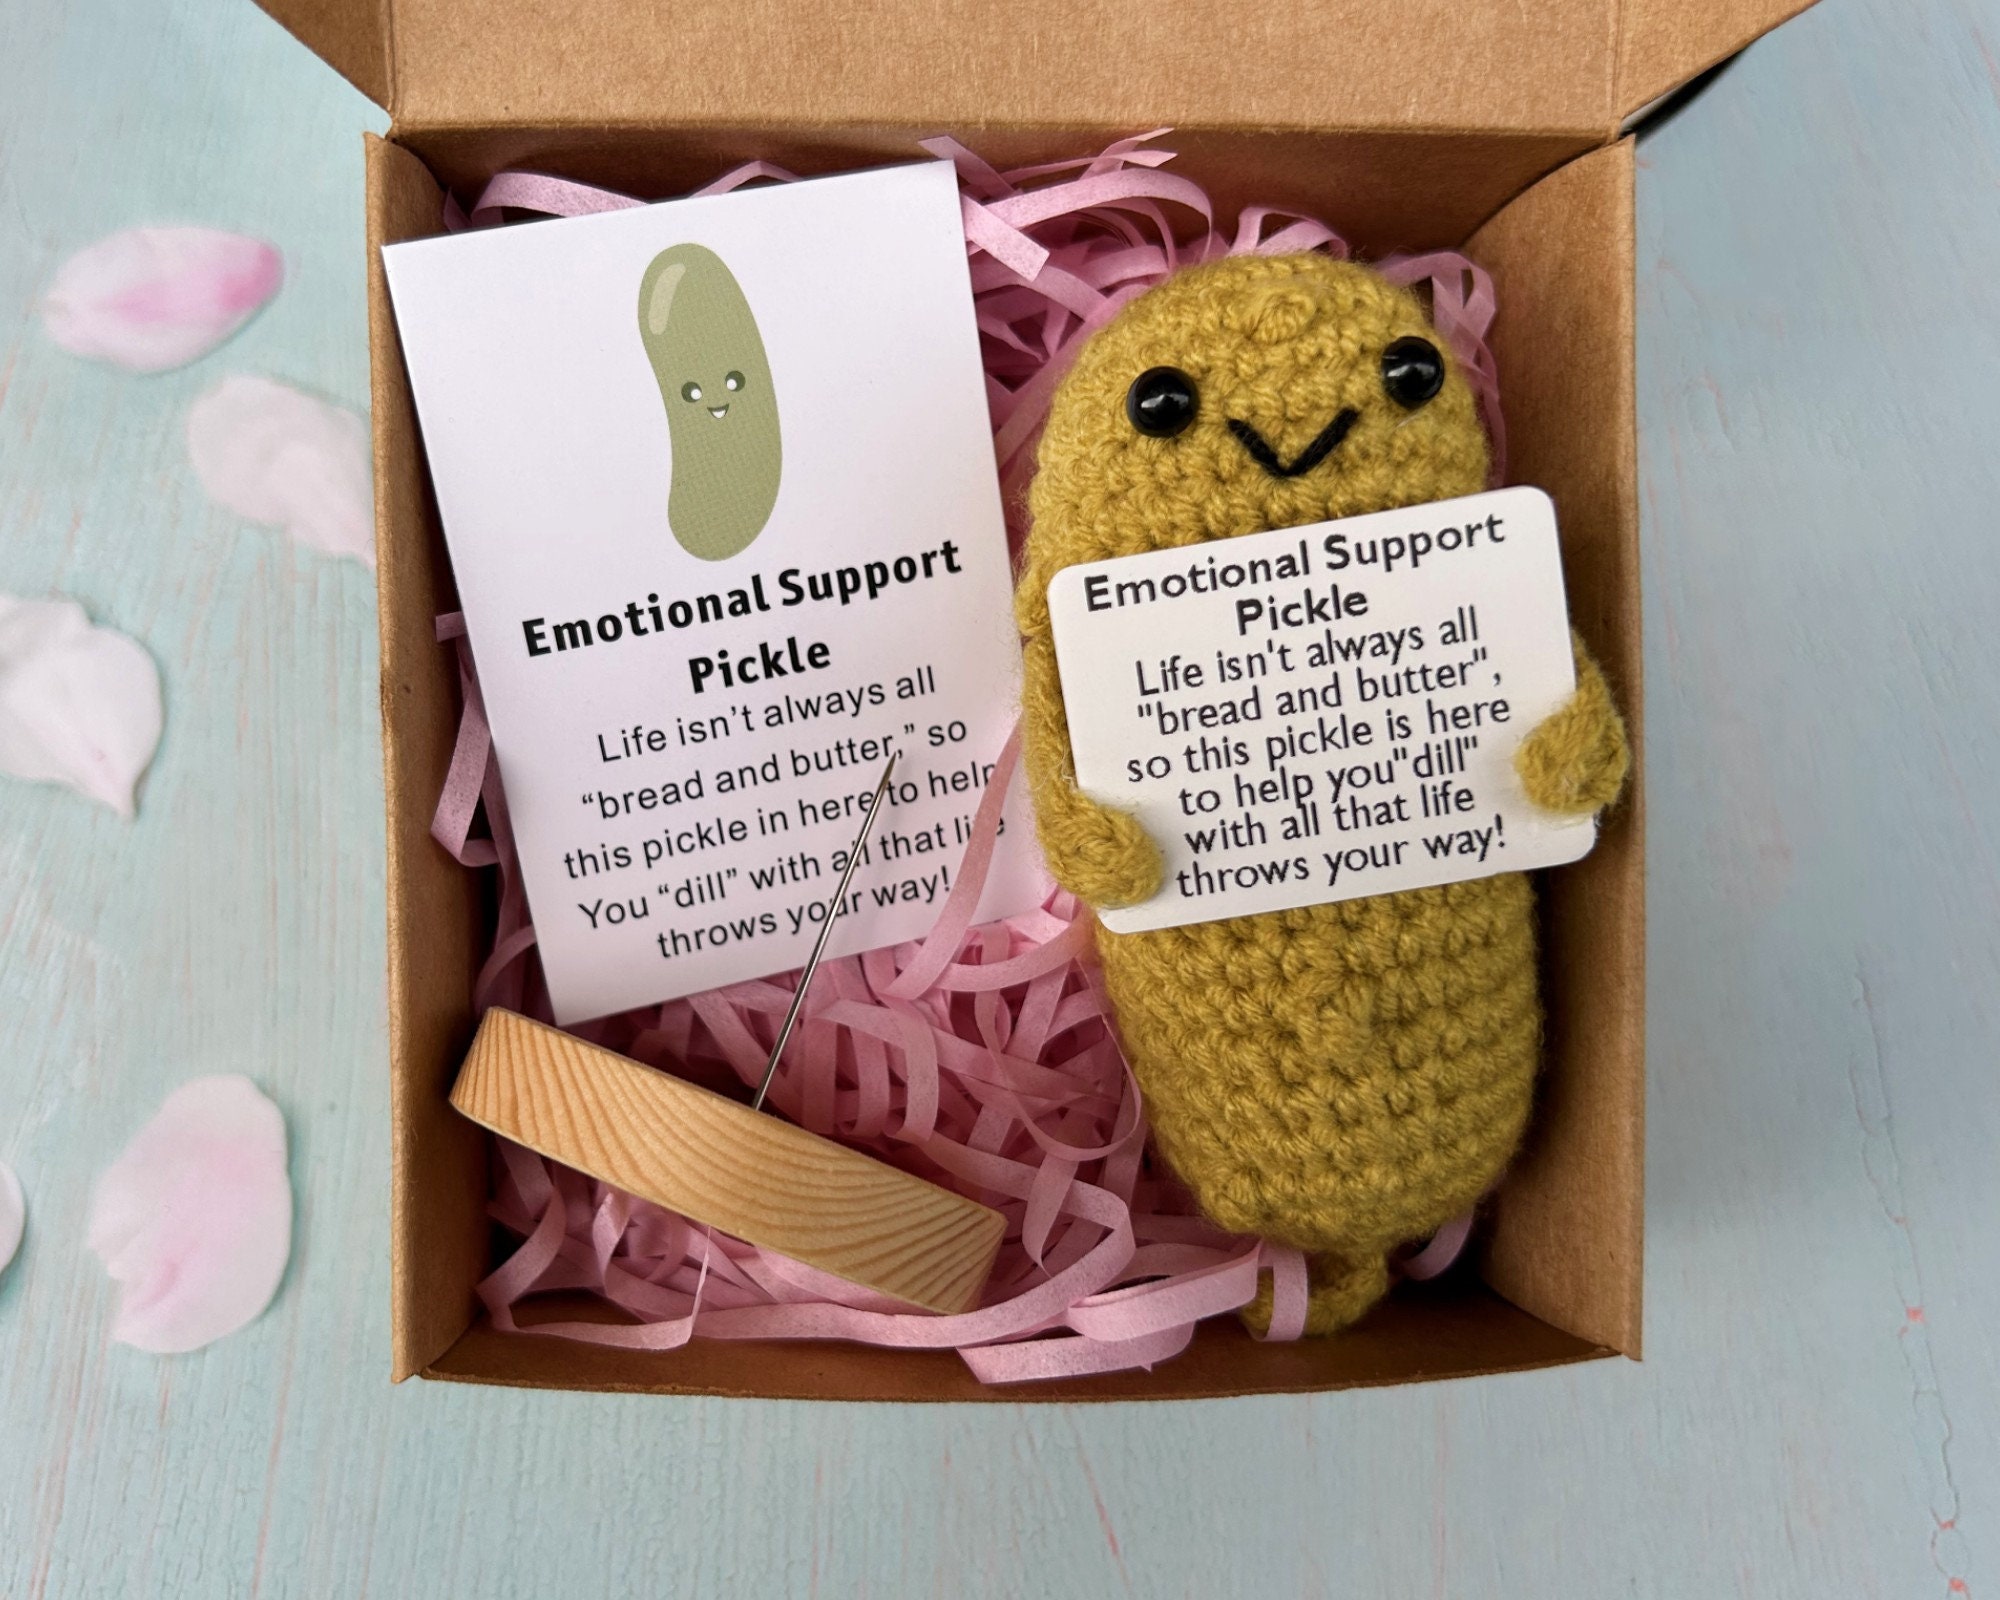 OVNMFH Handmade Emotional Support Pickle with Positive Affirmation, Crochet Pickled Cucumber, Fun Stress Relief Toy, Cute Handwoven Ornaments, Gift